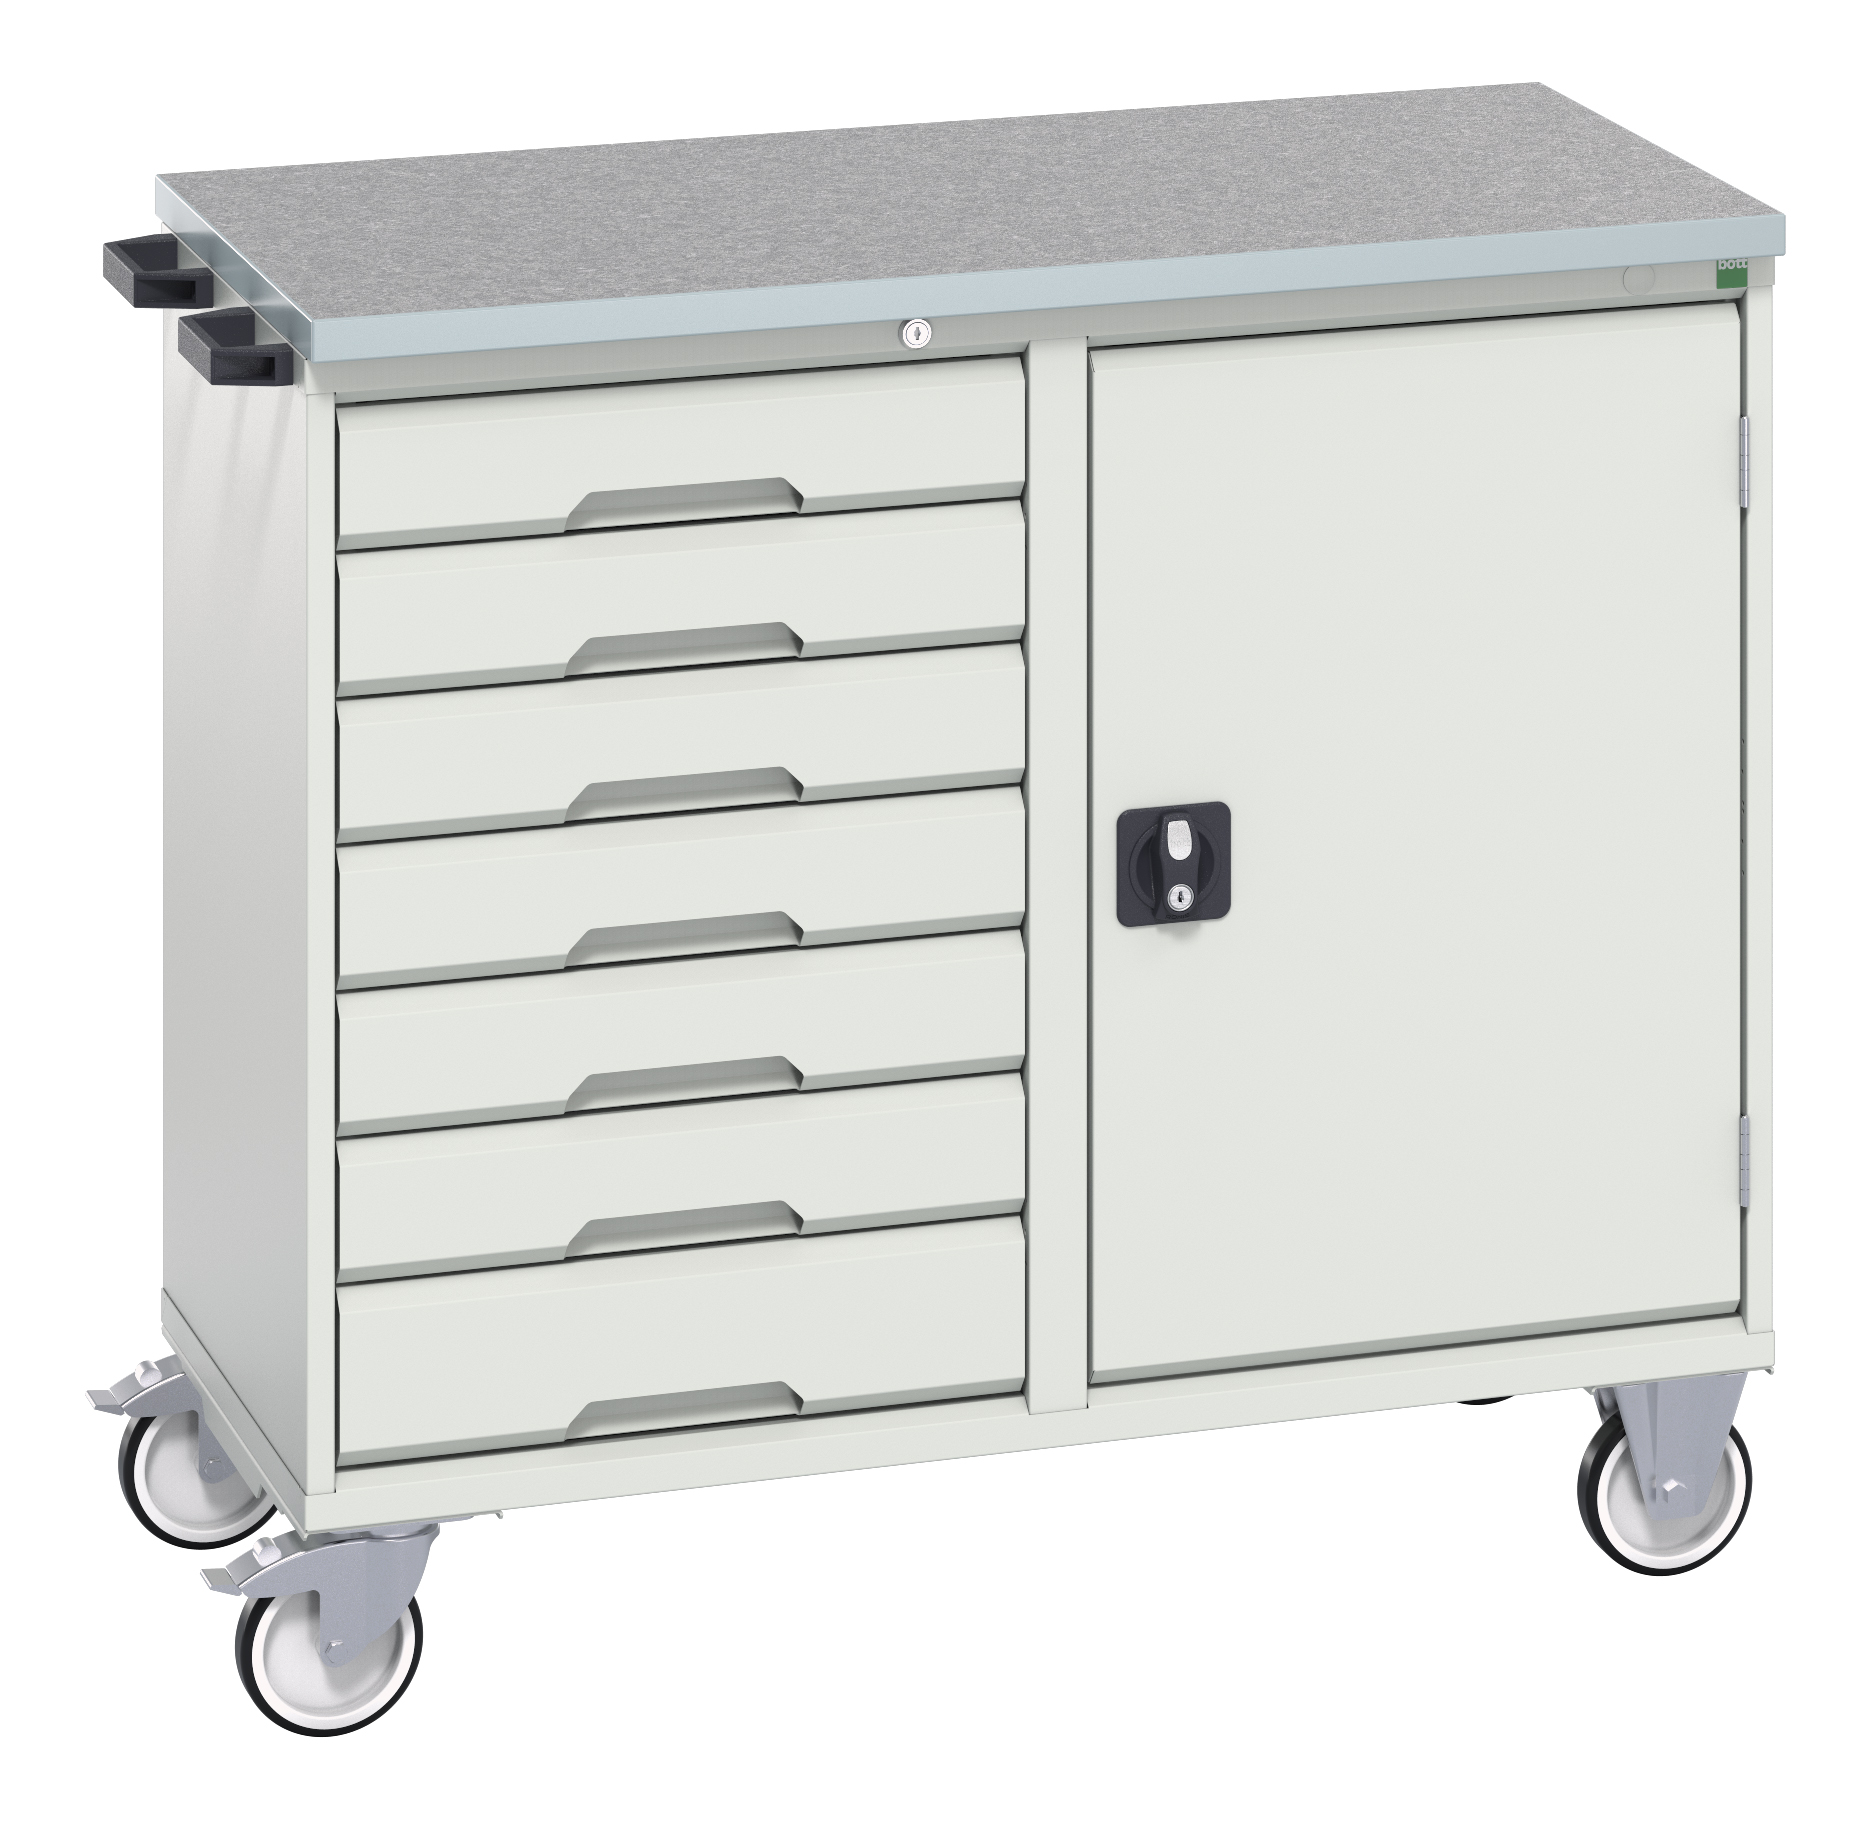 Bott Verso Maintenance Trolley With 7 Drawers / Cupboard & Lino Top - 16927126.16